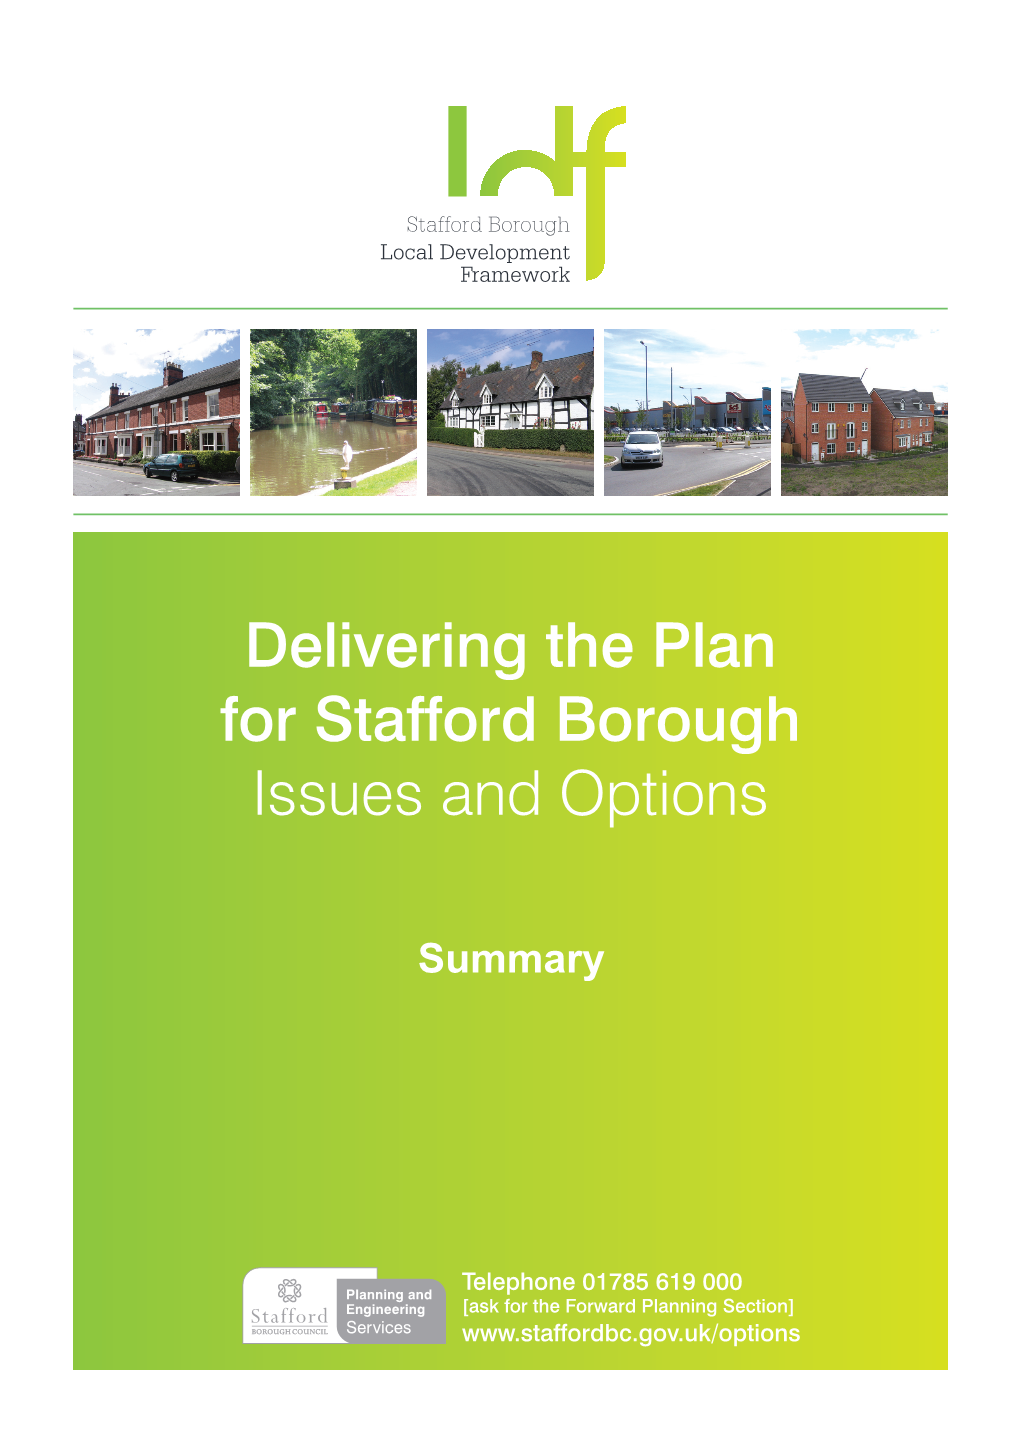 Delivering the Plan for Stafford Borough Issues and Options